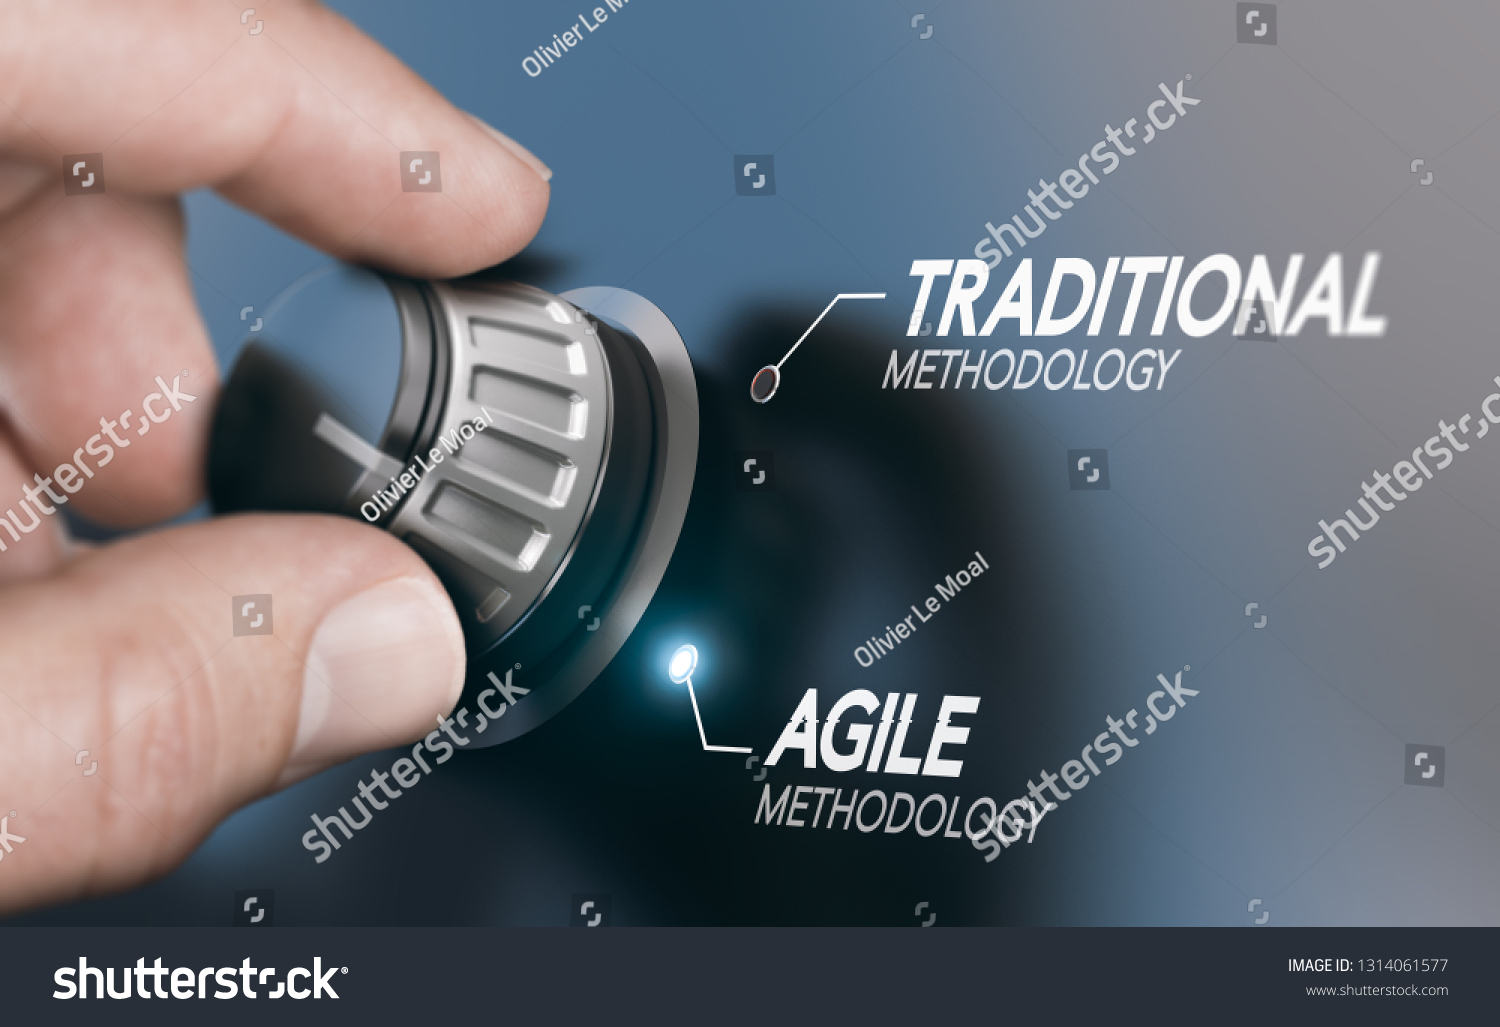 Man turning knob to changing project management methodology from traditional to agile PM. Composite image between a hand photography and a 3D background. #1314061577